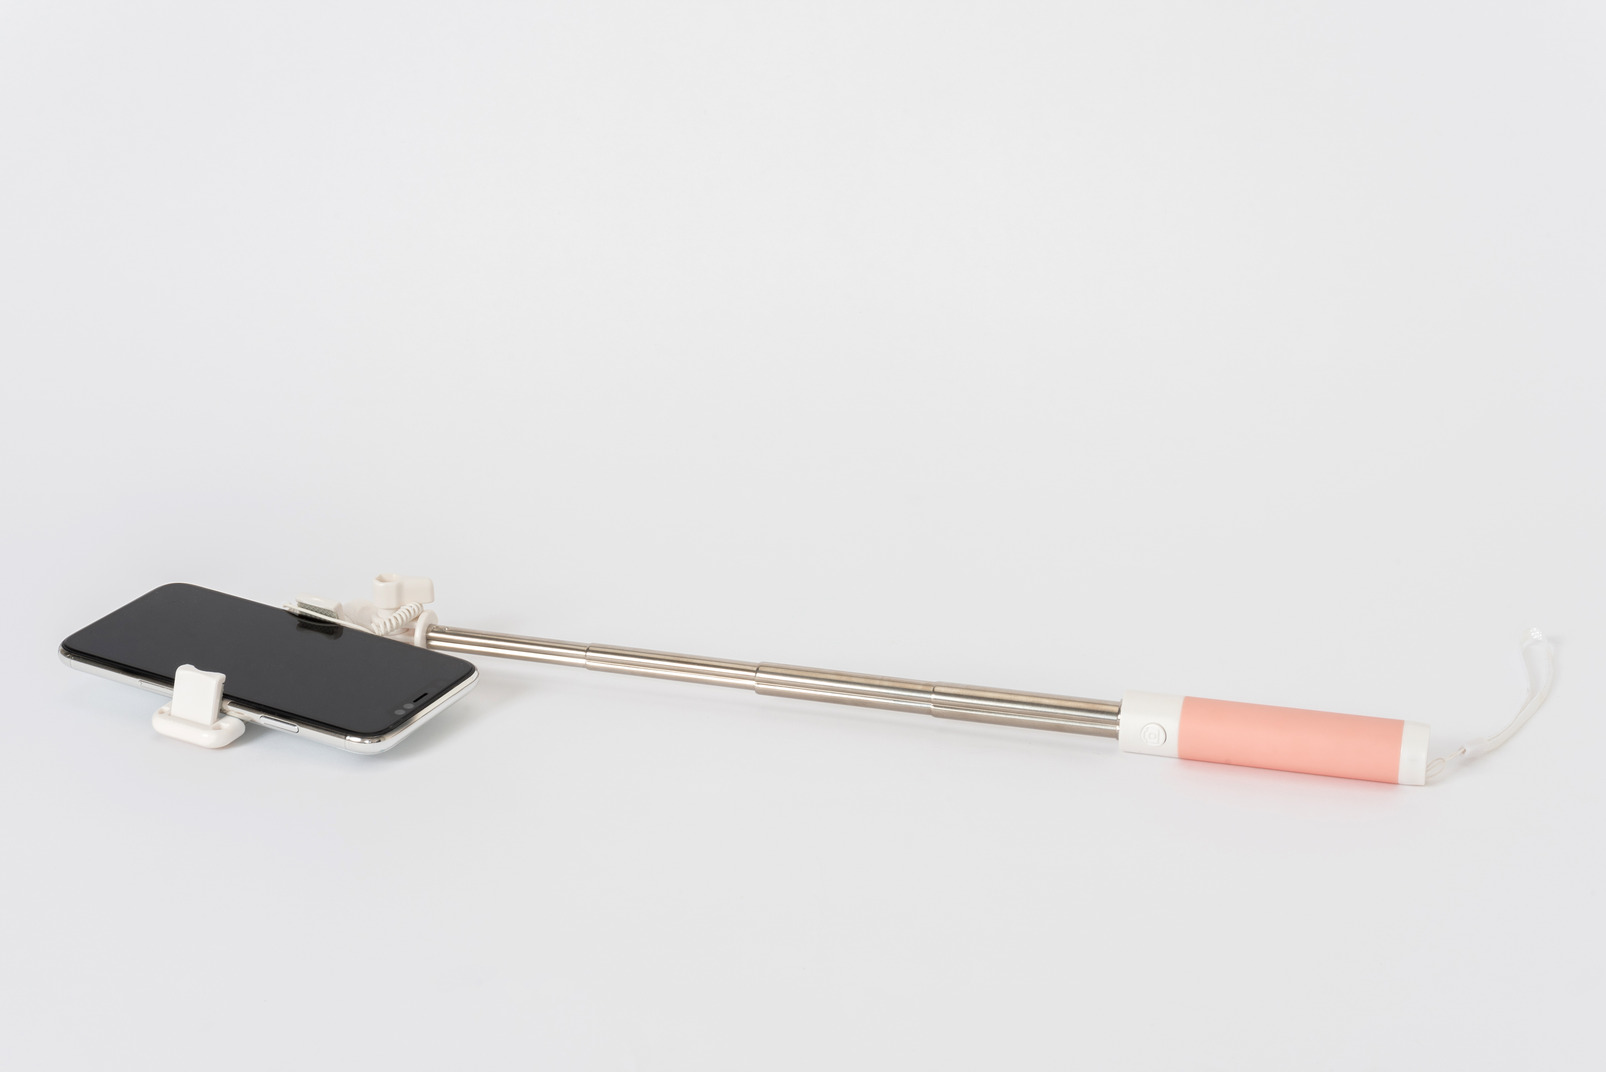 Selfie stick with a smartphone on a white background